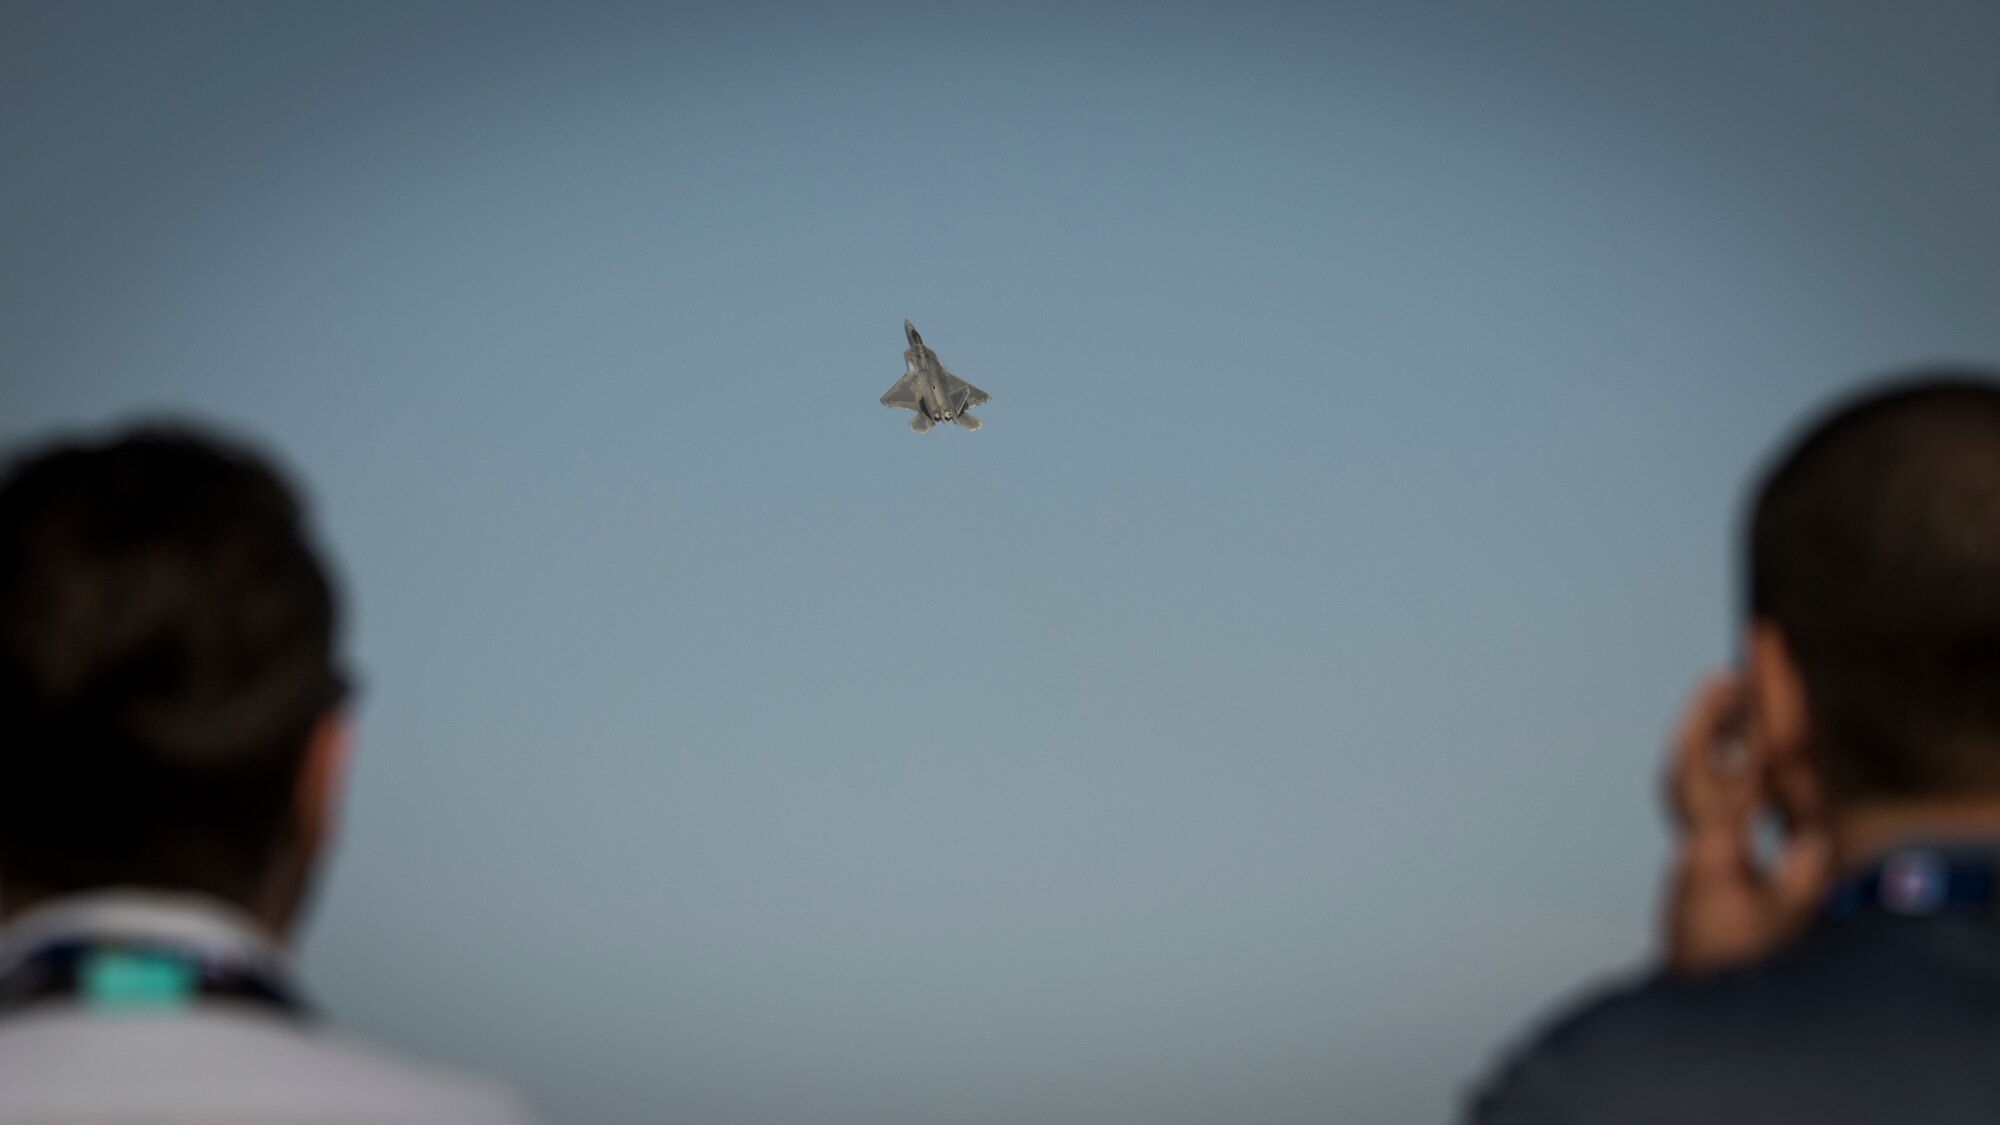 Spectators look on as a U.S. Air Force F-22 Raptor performs an aerial demonstration at the Dubai Airshow, Nov. 19, 2019.